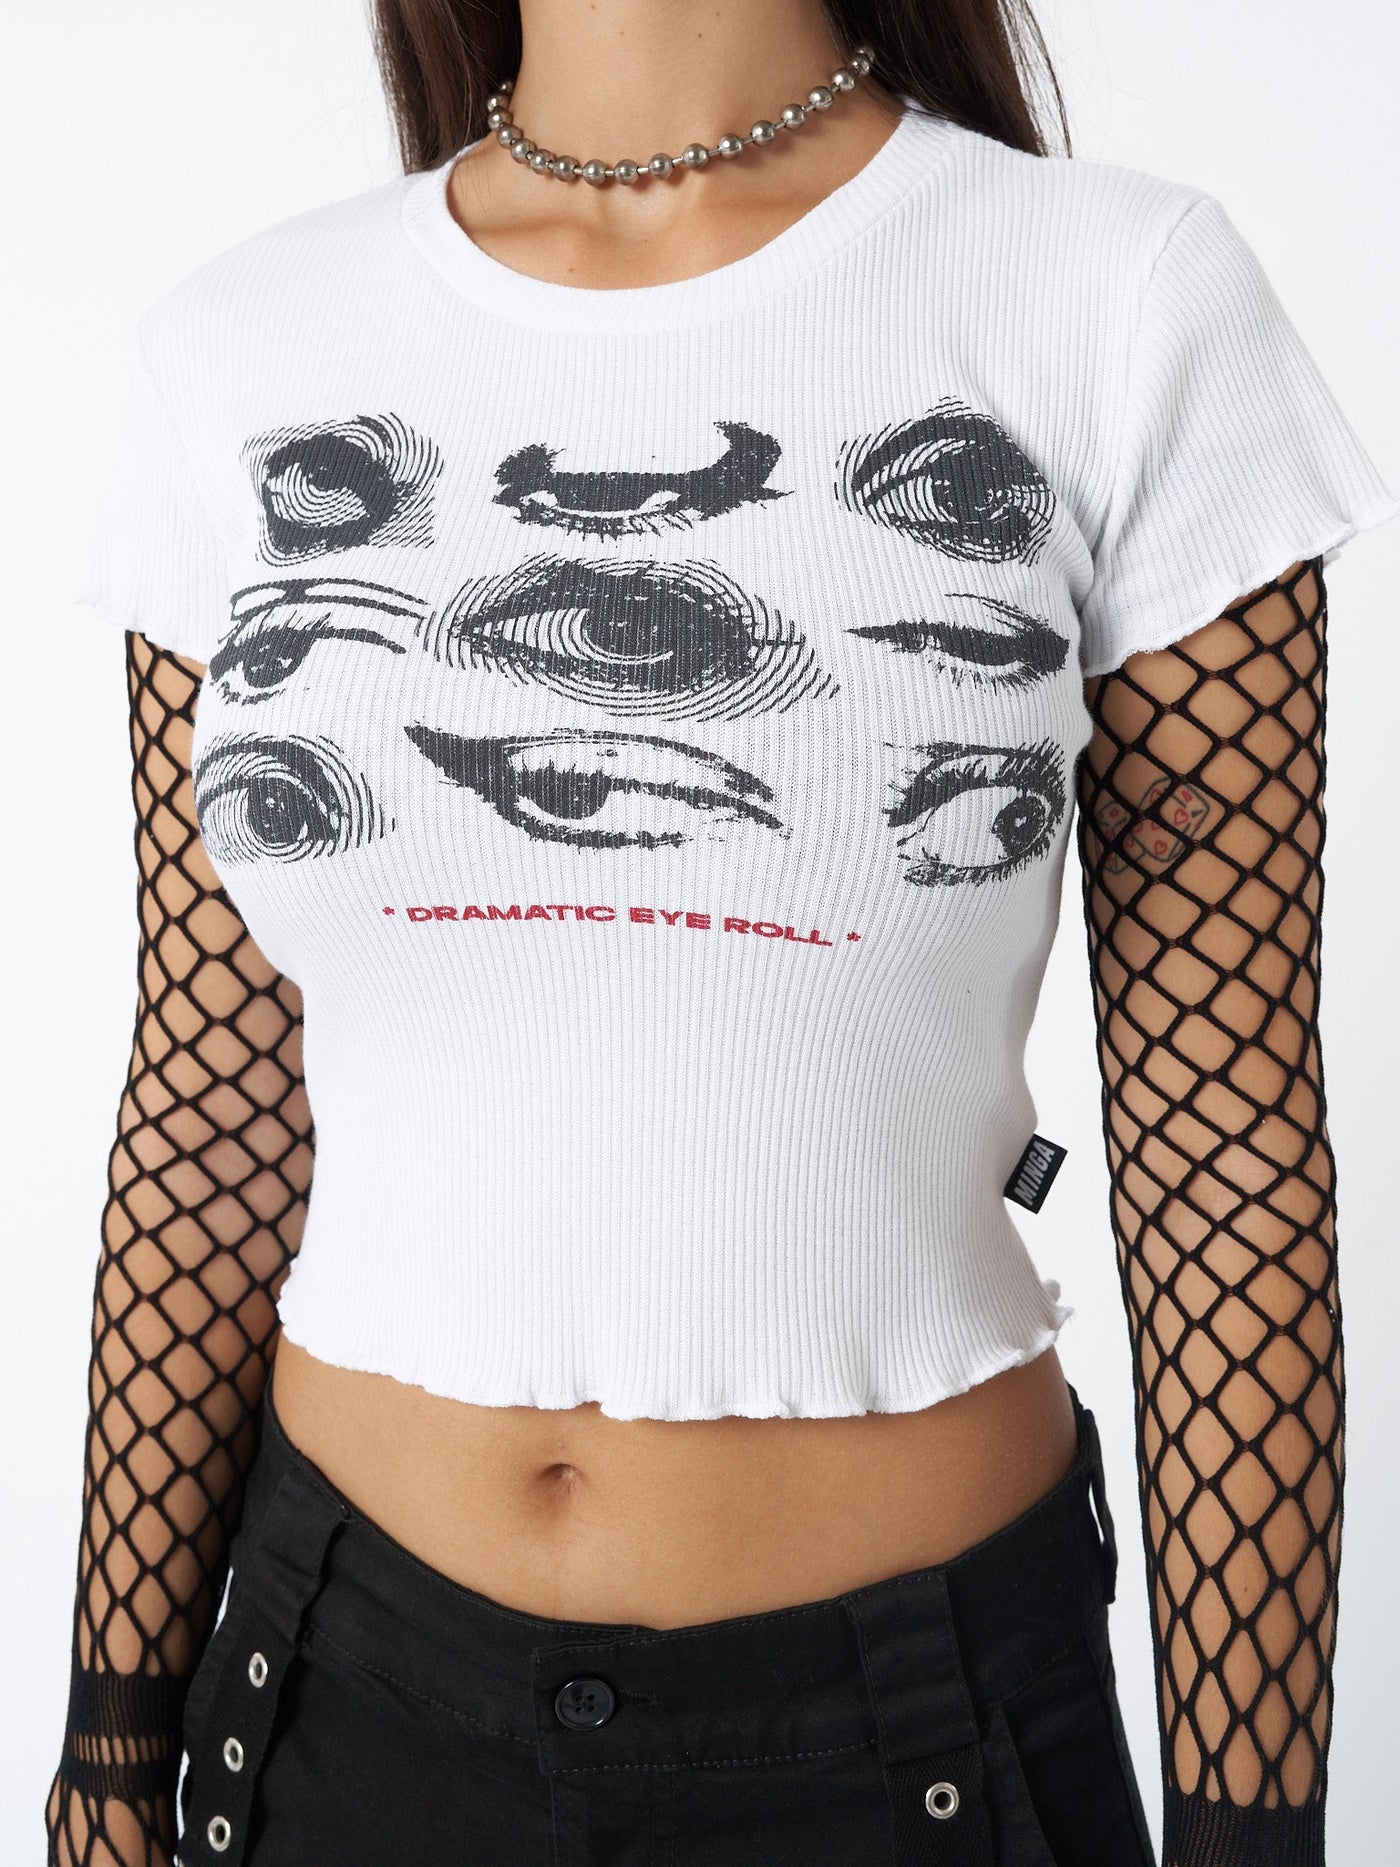 Rib baby tee in white with Dramatic Eye Roll graphic screen print